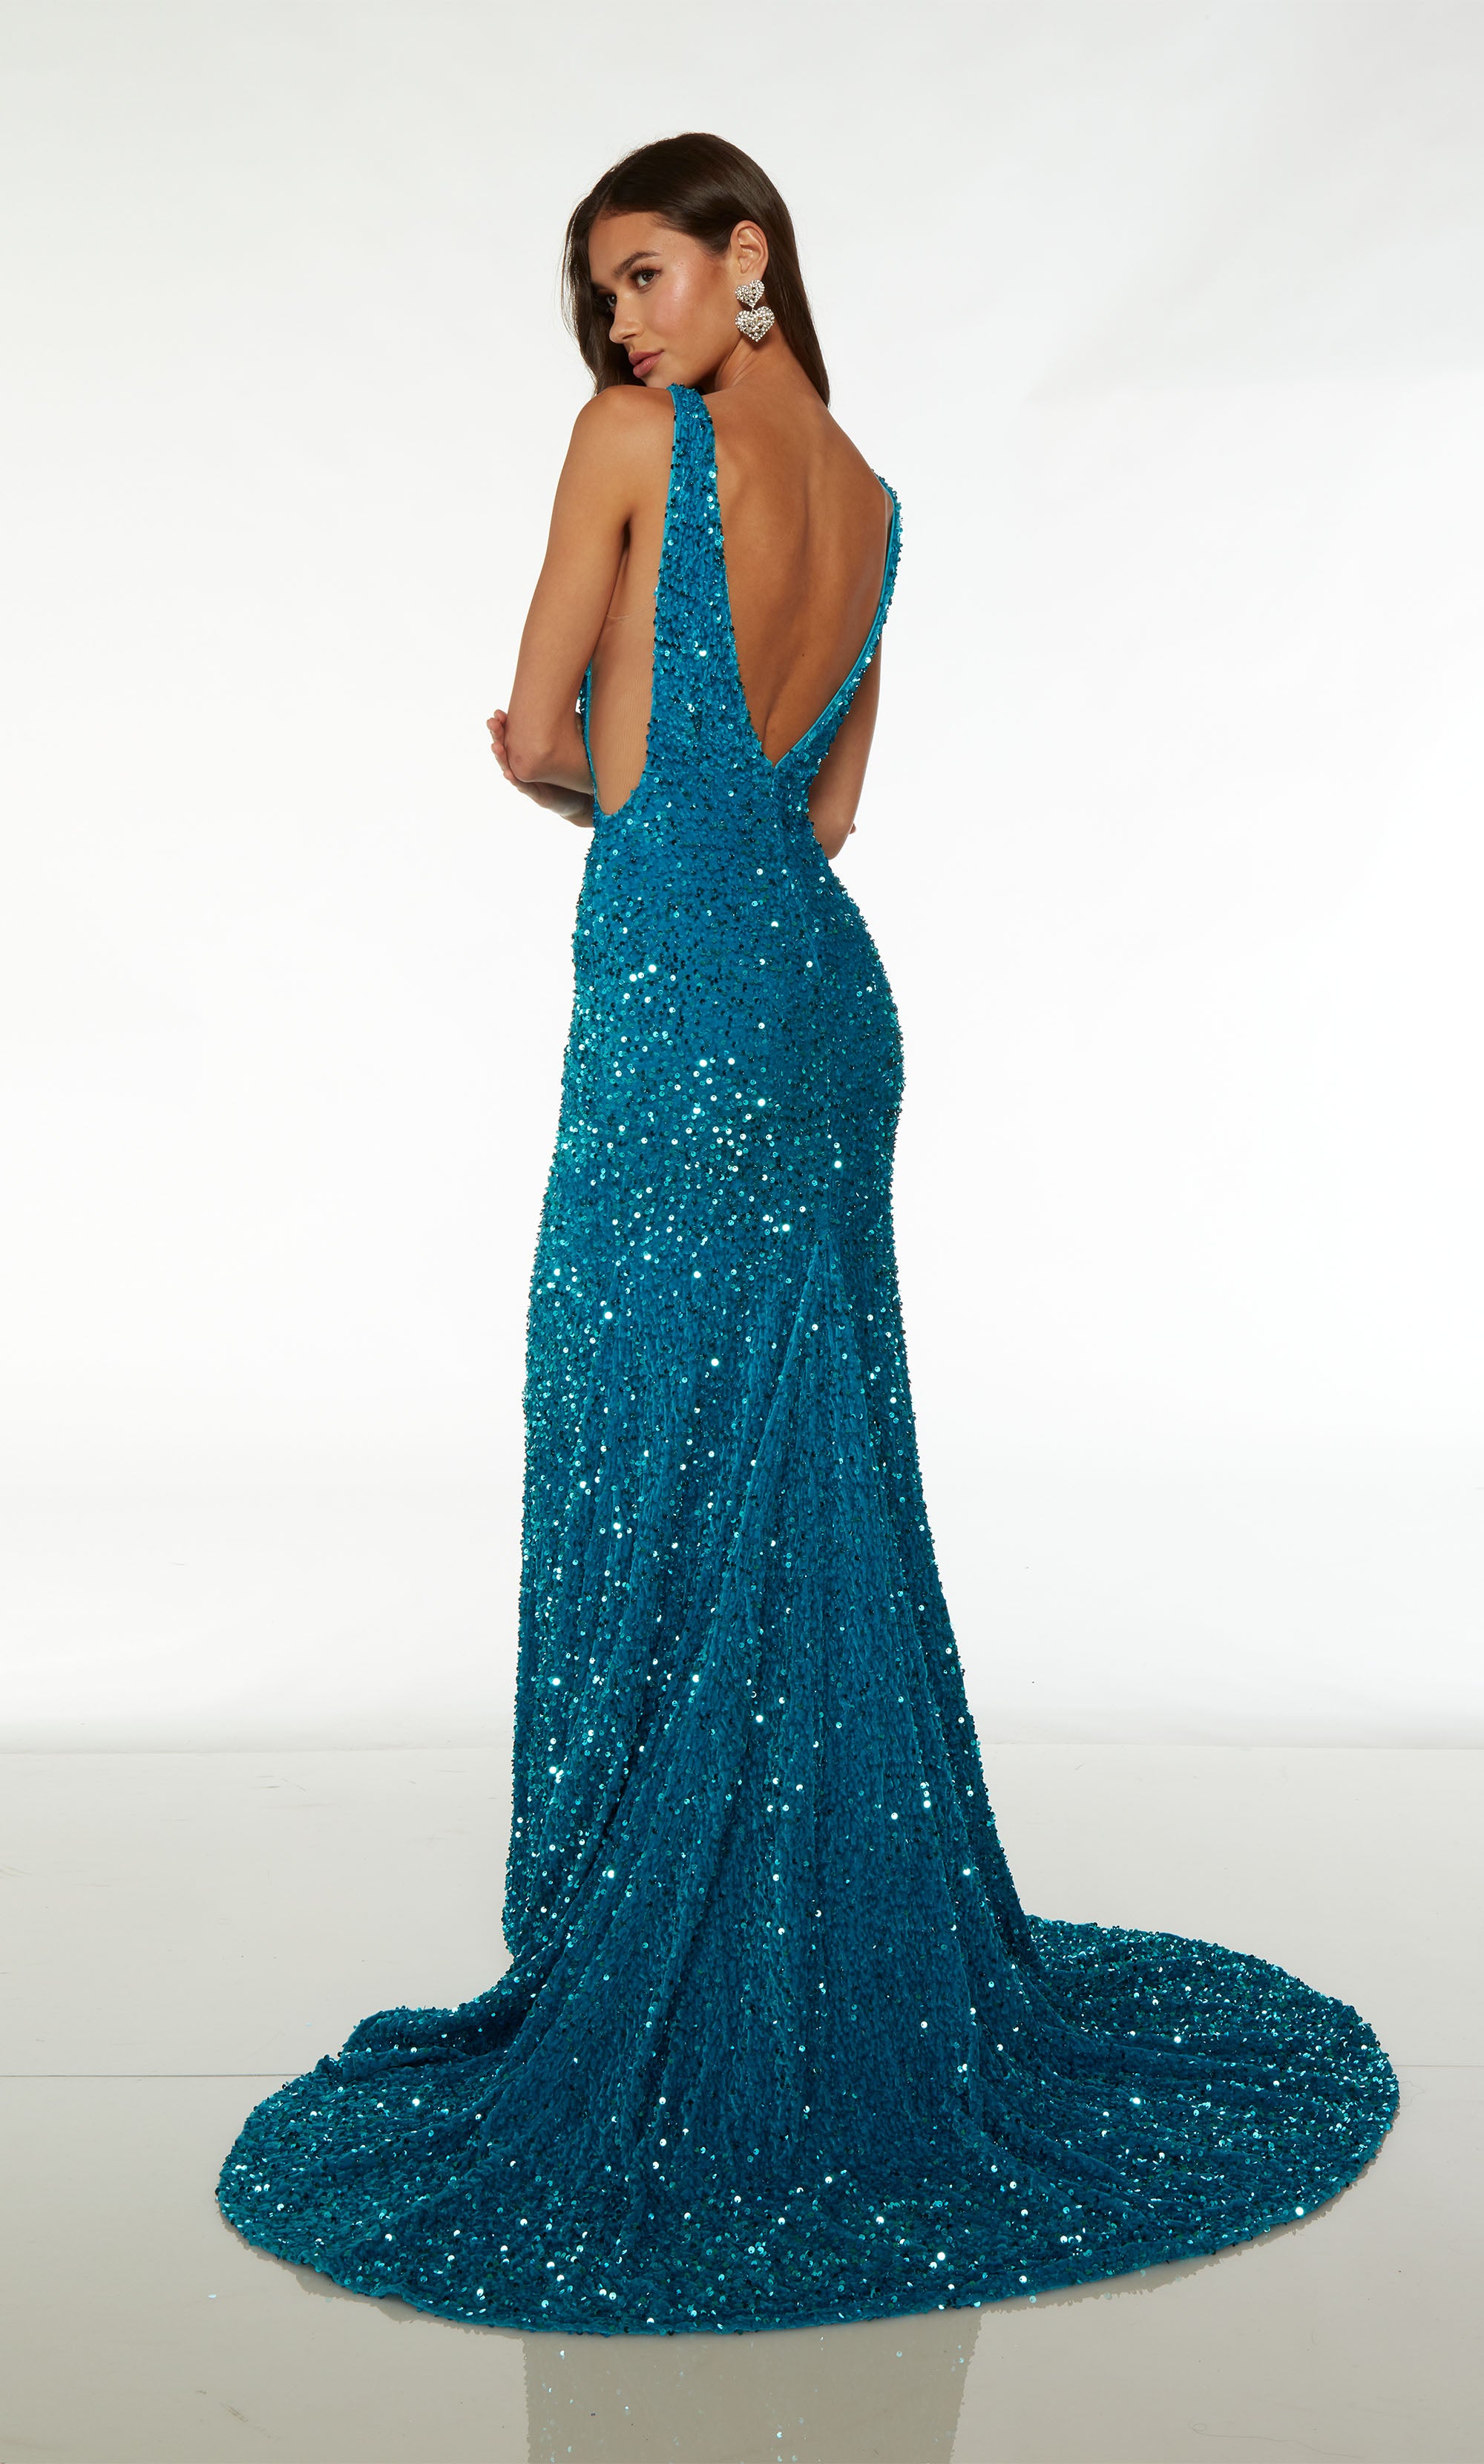 Gorgeous fit-and-flare designer dress in ocean blue plush sequins: plunging neckline, illusion side cutouts, V-shaped open back, and train.